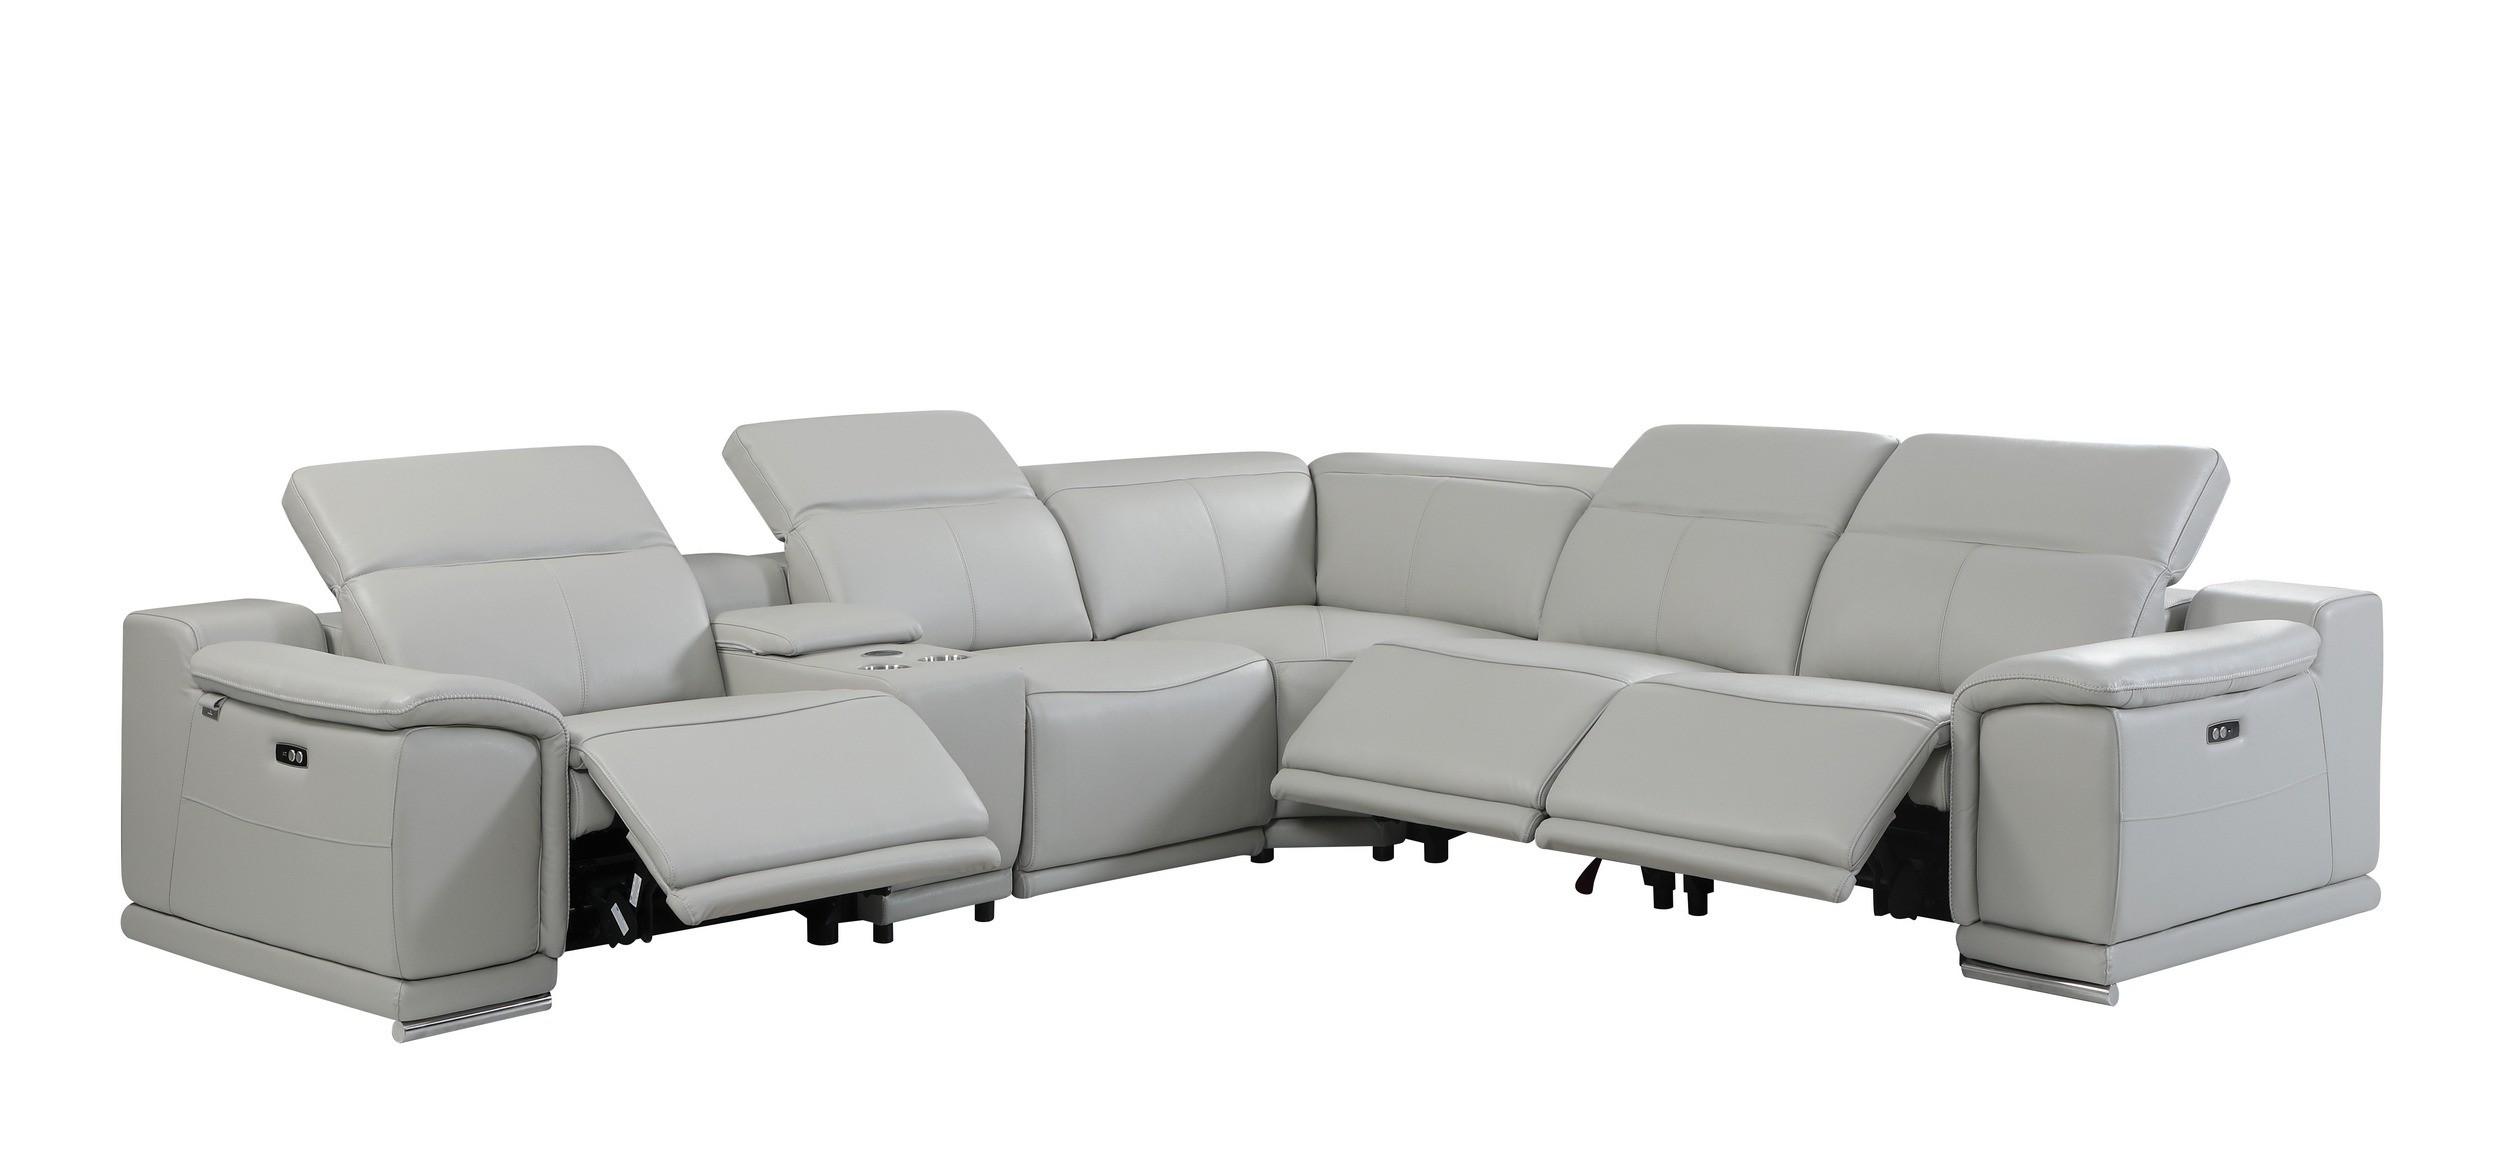 

    
LIGHT GRAY 3-Power Reclining 6PC Sectional w/ 1-Console 9762 Global United
